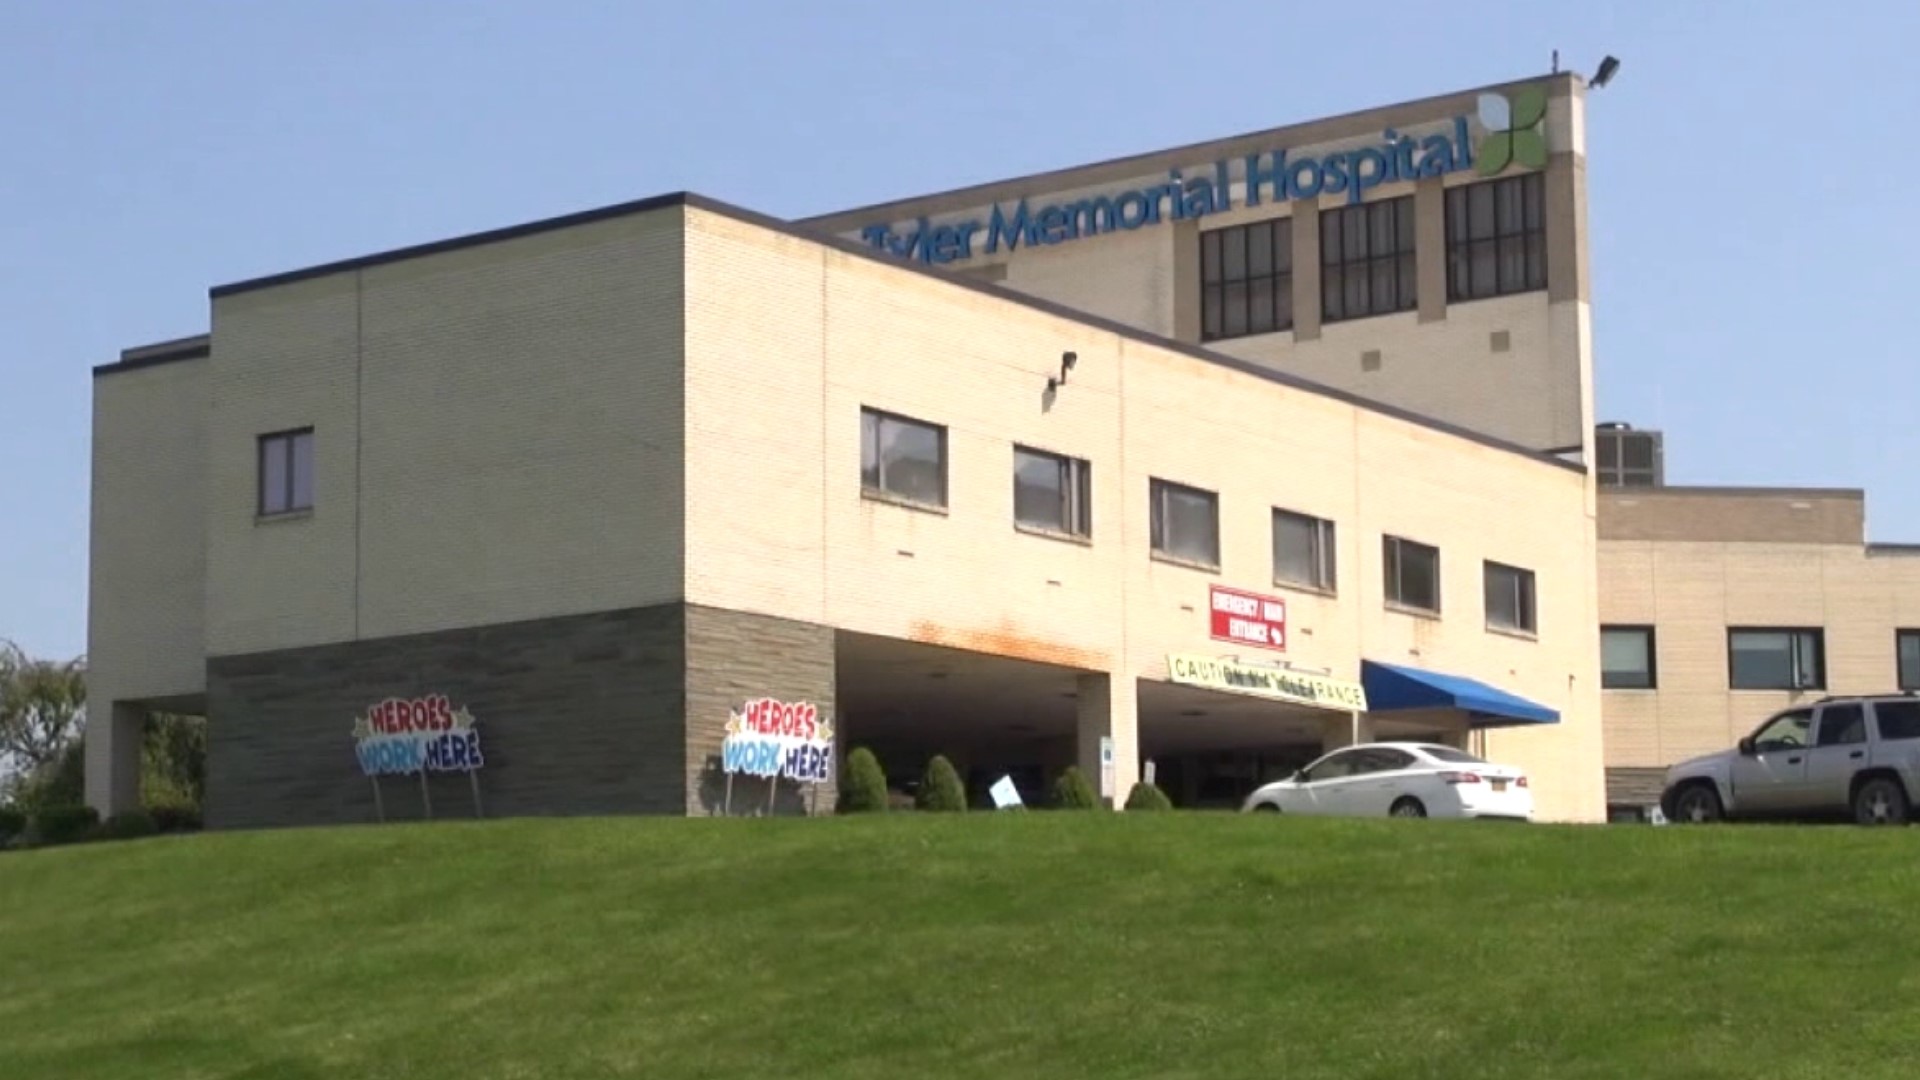 Guthrie patients can now receive care at the former Tyler Memorial Hospital in Wyoming County.